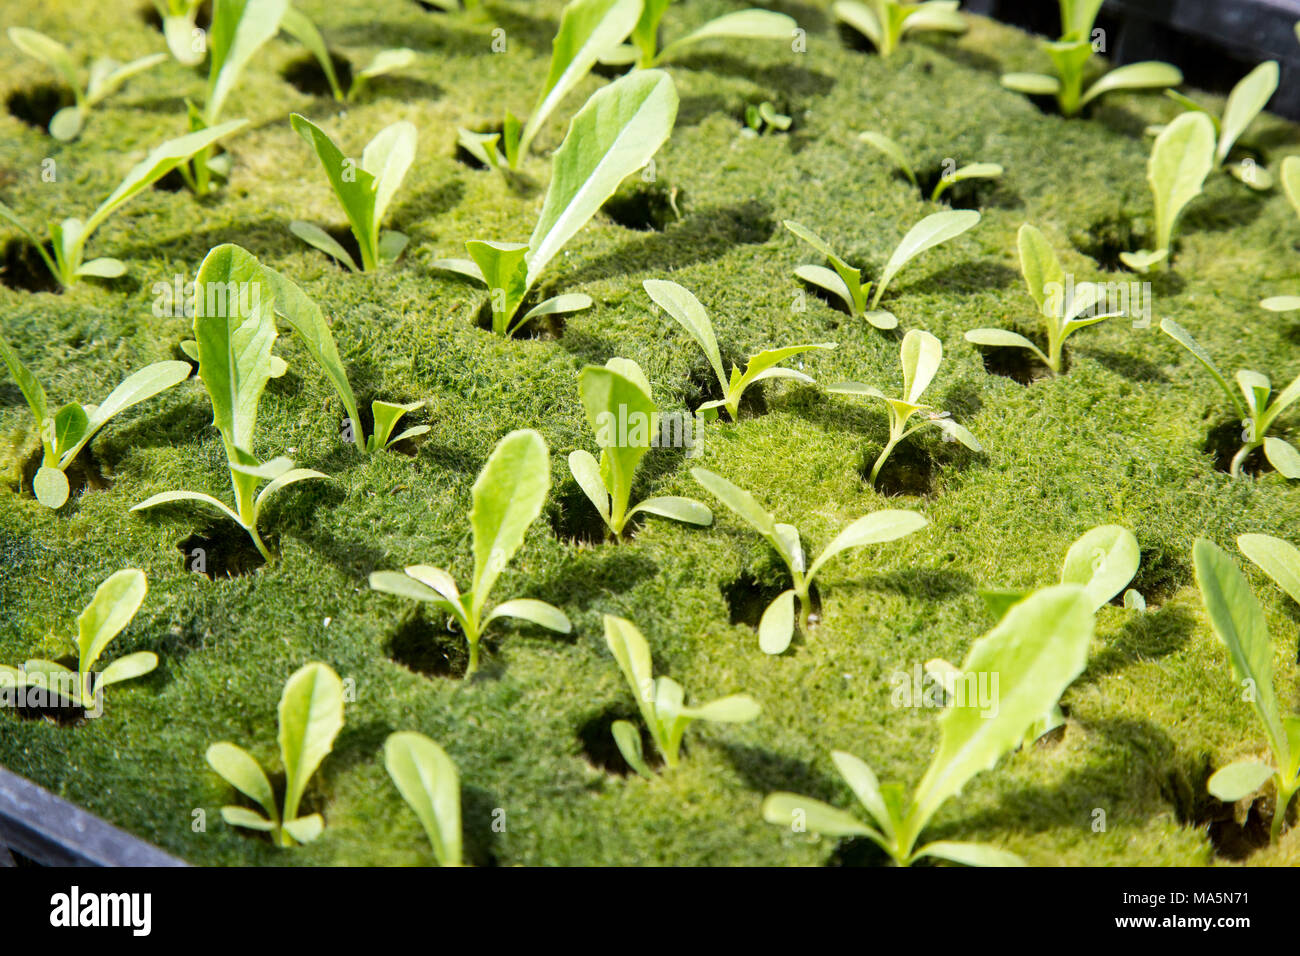 Hydroponic Agriculture.  Greenhouse Growing Lettuce Seedlings.  Dyersville, Iowa, USA. Stock Photo